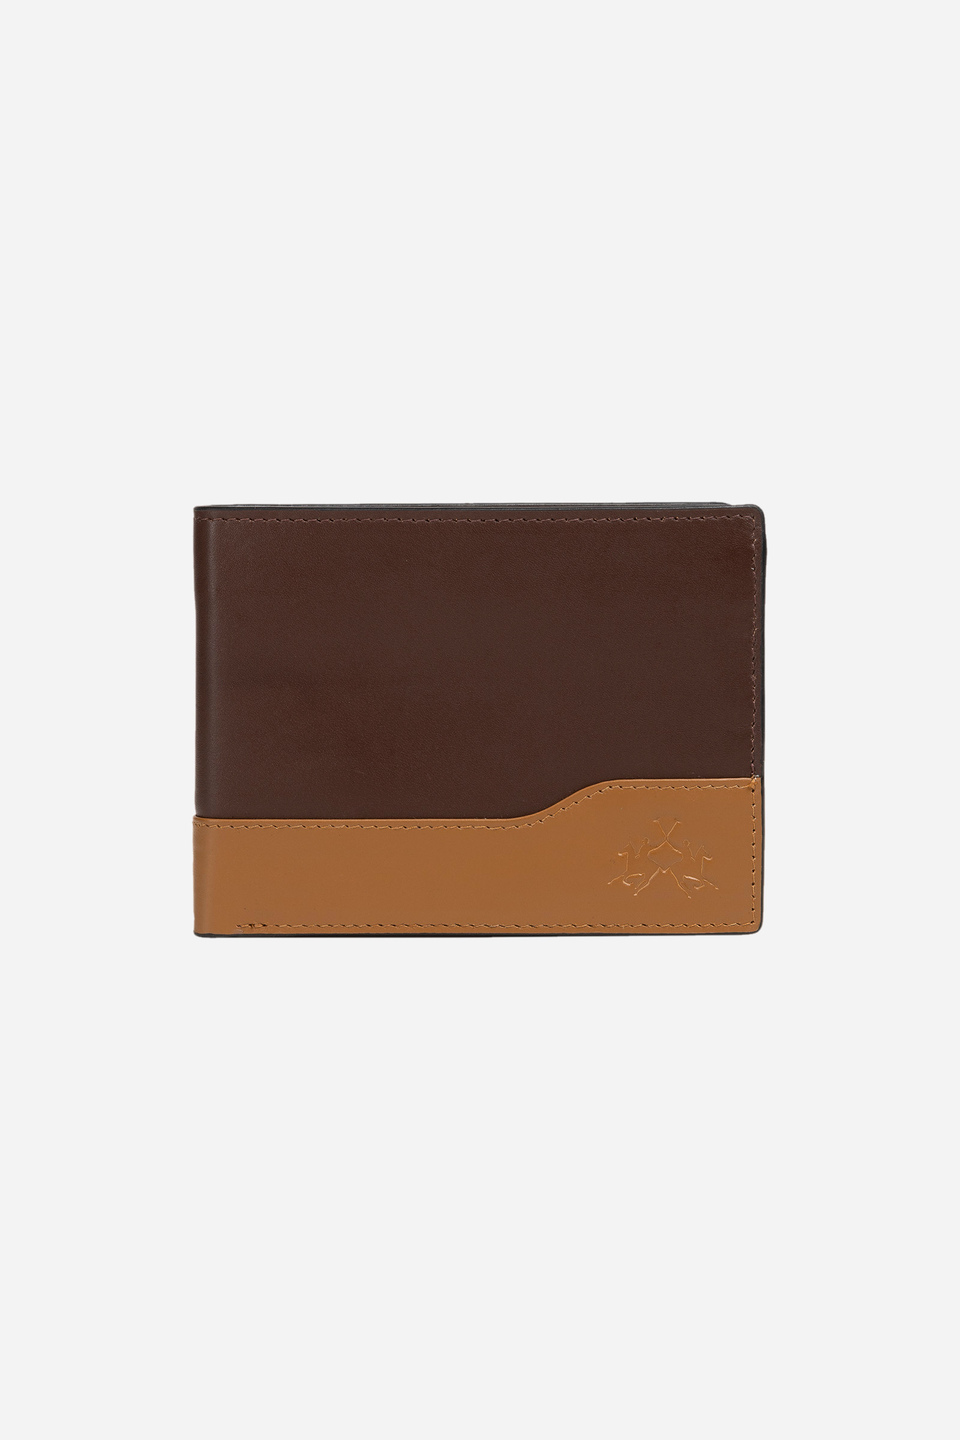 Round Zipper Brown Leather Mens Wallet... - Online Fashion Accessories for  Mens and Women